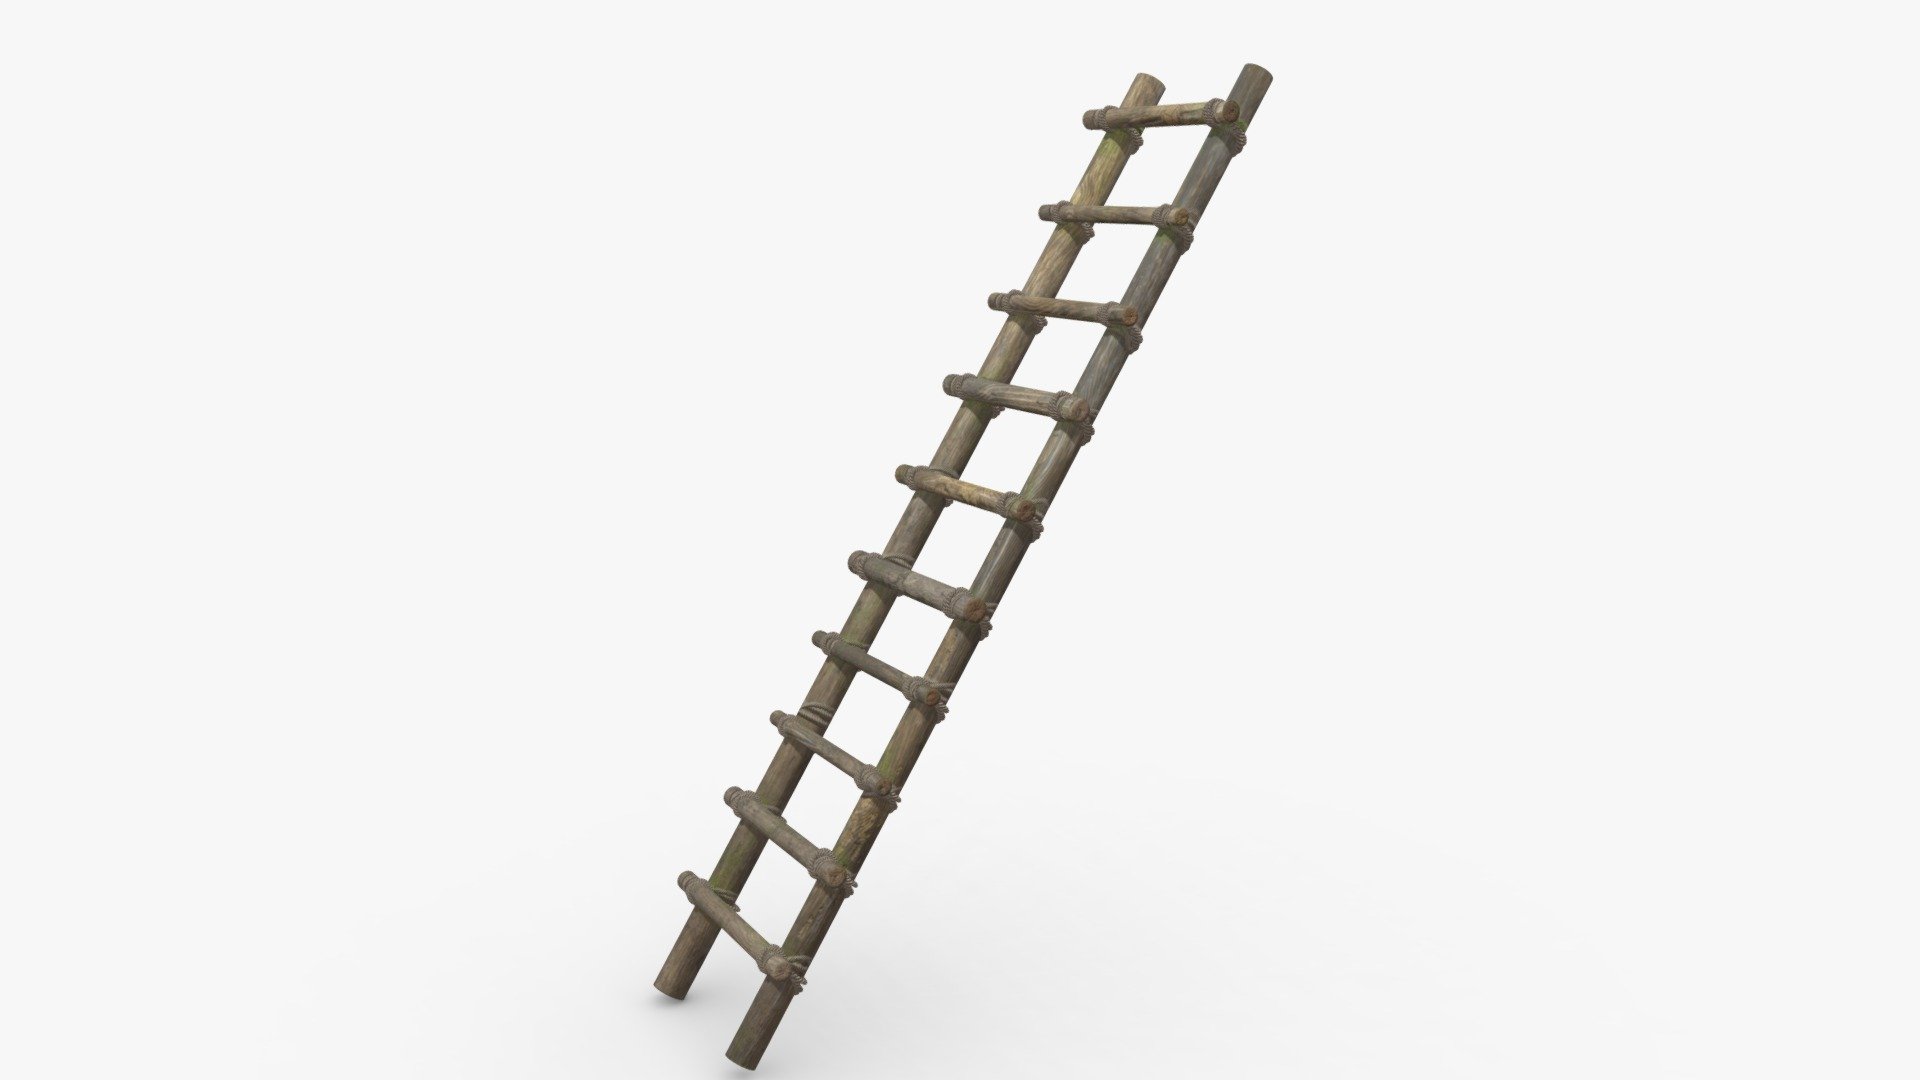 Check out my website for more products and better deals! &amp;gt;&amp;gt; SM5 by Heledahn &amp;lt;&amp;lt;


This is a digital 3d model of a simple ladder, made by hand using rough wood and rope. The model has painted rope in its geometry for super low-polycount, and extra mesh rope that can be added for extra realism. 

(TIF TEXTURES AND DISPLACEMENT ONLY FOR SALE IN MY WEBSITE 🔼).

This product will achieve realistic results in your rendering projects and animations, being greatly suited for close-ups due to their high quality topology and PBR shading 3d model